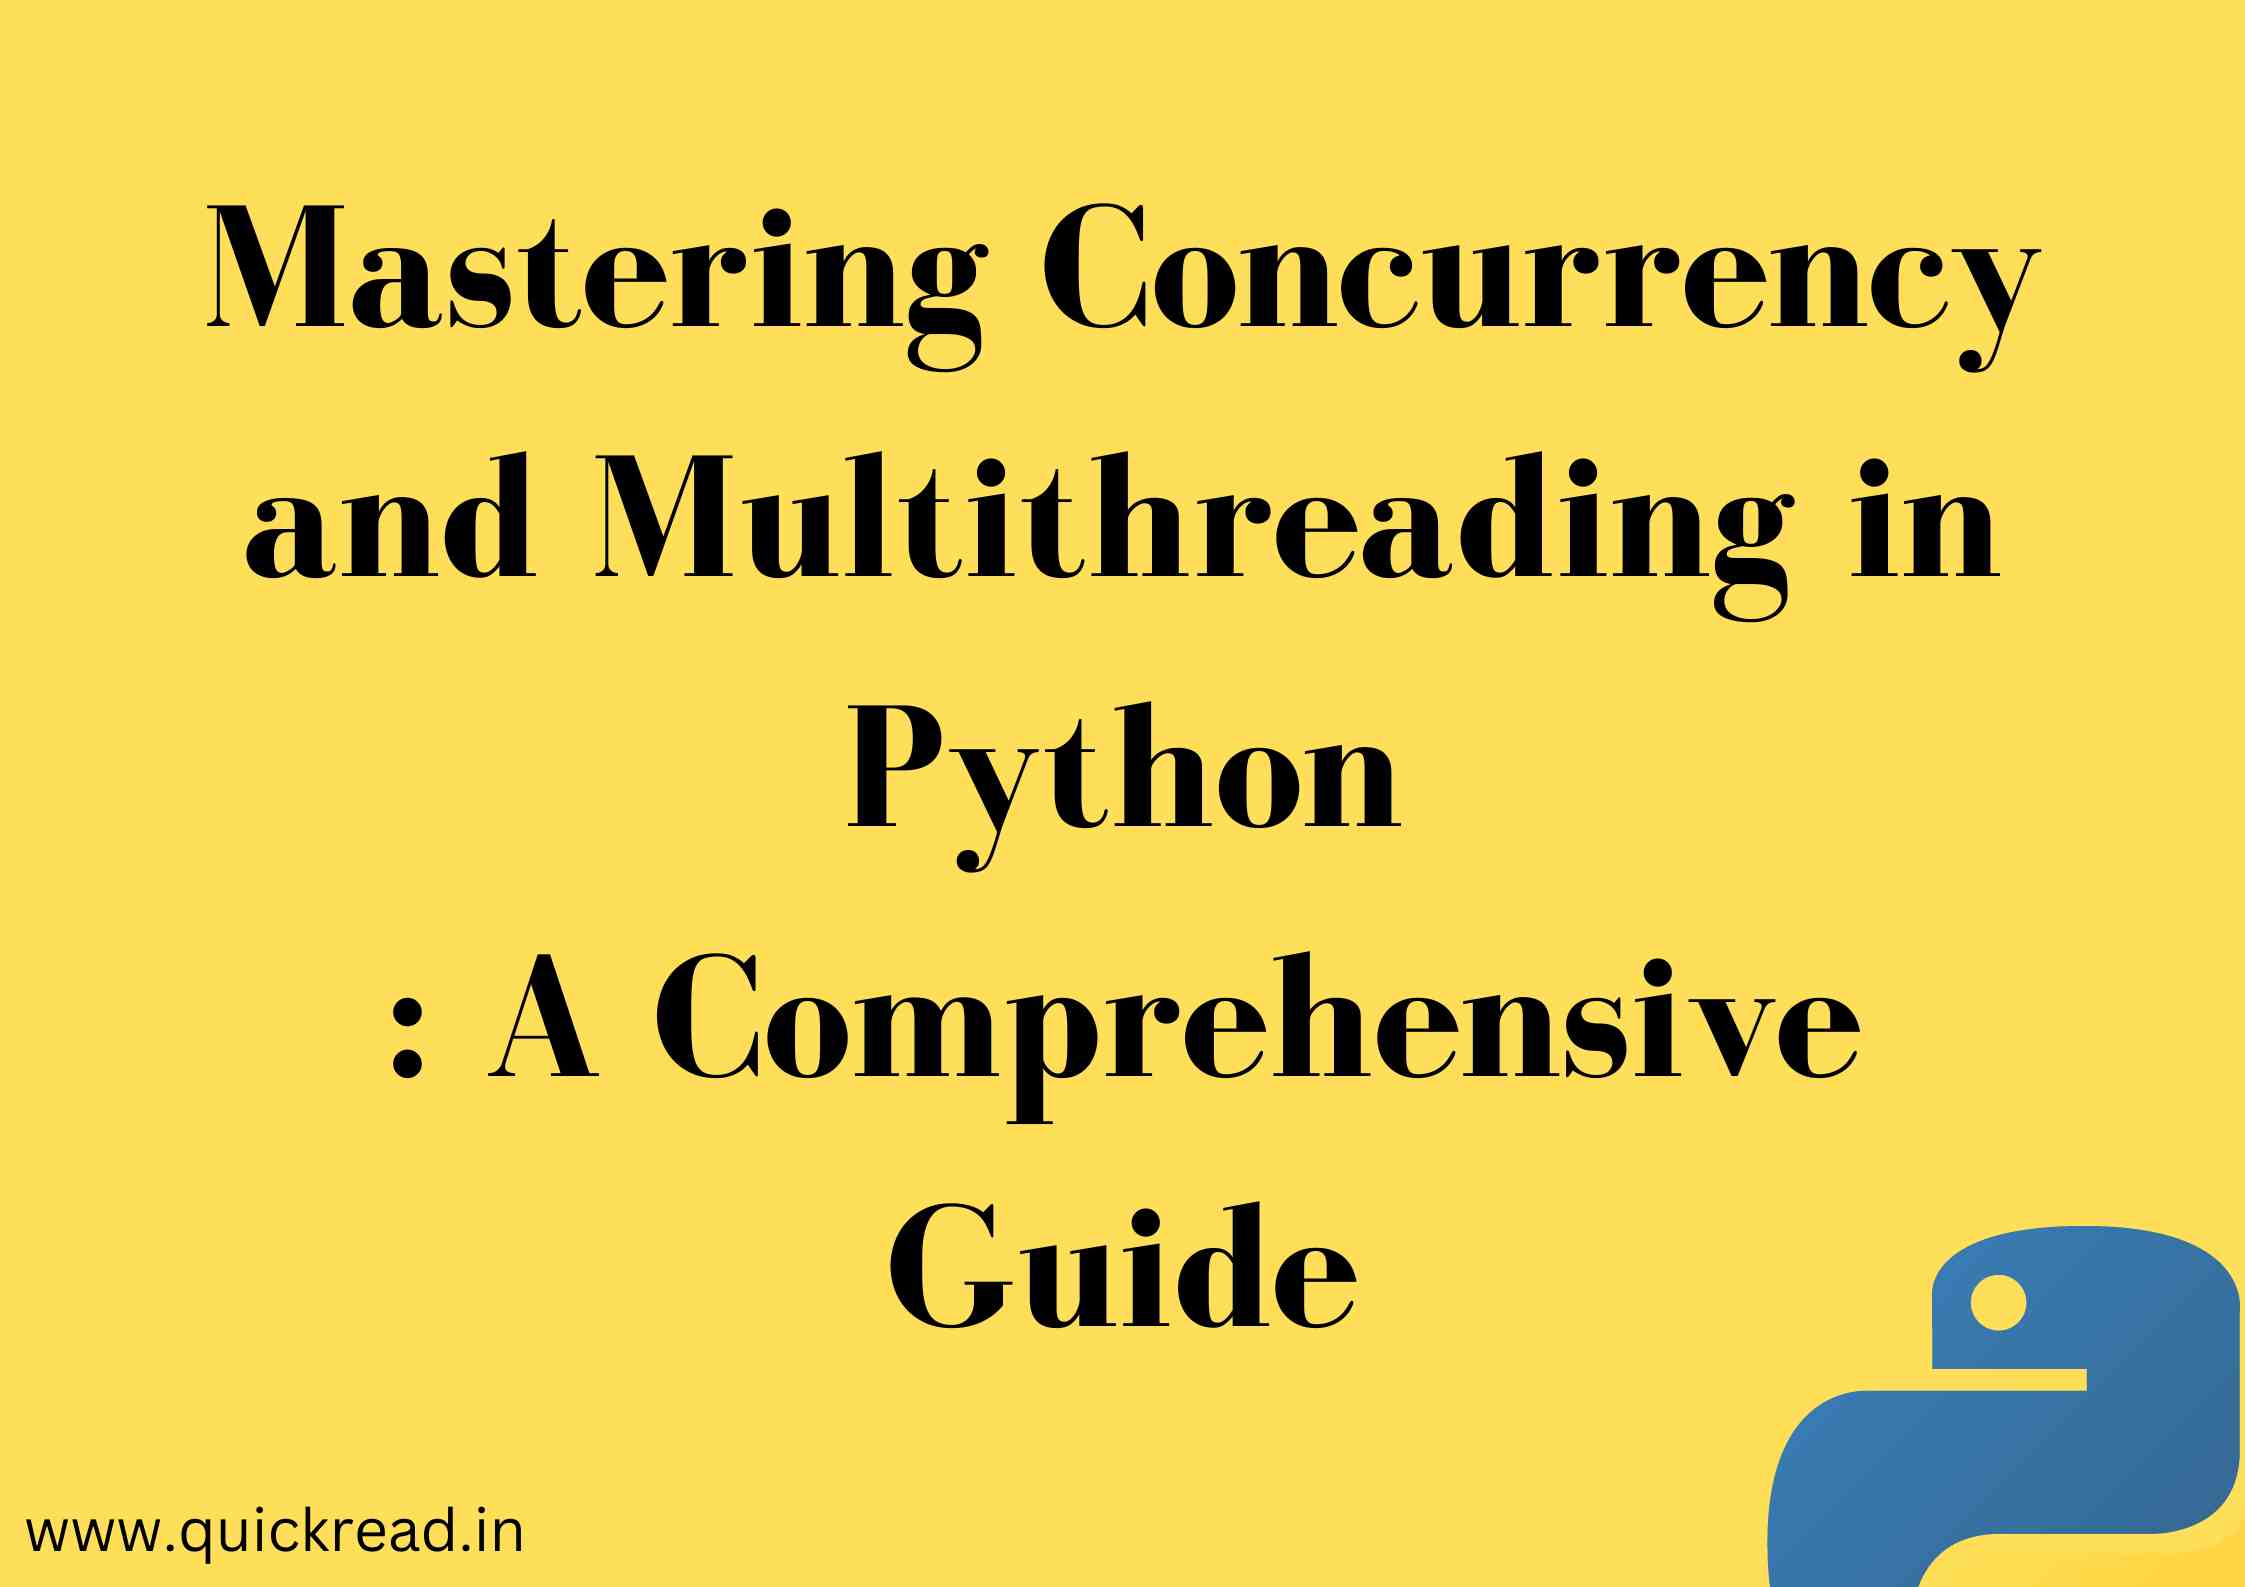 Mastering Concurrency and Multithreading in Python A Comprehensive Guide